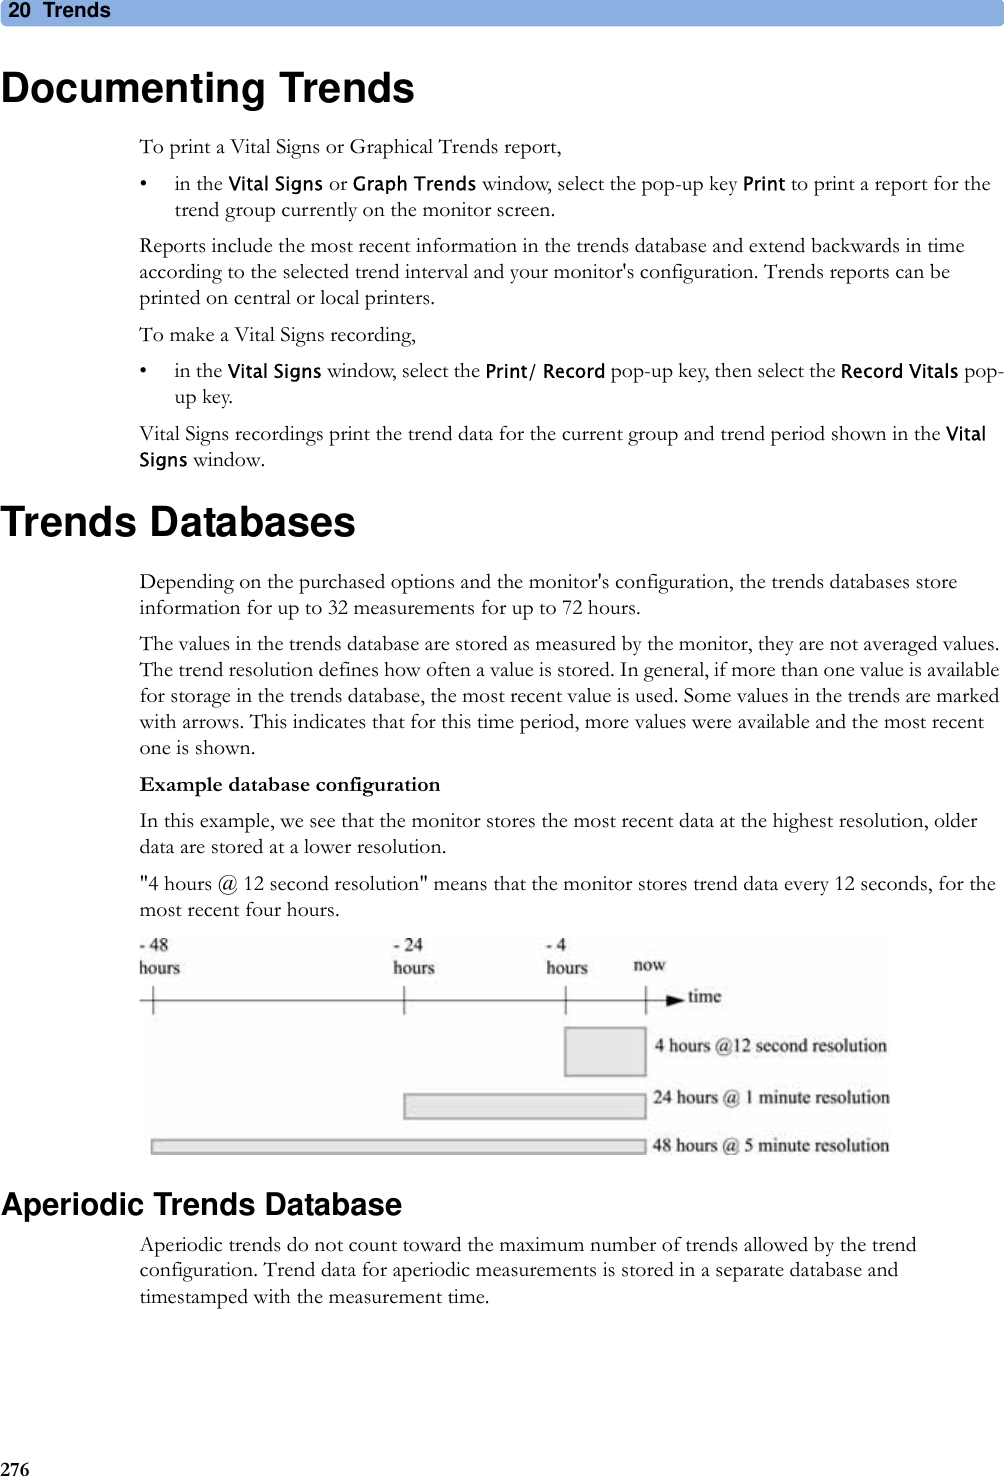 20 Trends276Documenting TrendsTo print a Vital Signs or Graphical Trends report,•in the Vital Signs or Graph Trends window, select the pop-up key Print to print a report for the trend group currently on the monitor screen. Reports include the most recent information in the trends database and extend backwards in time according to the selected trend interval and your monitor&apos;s configuration. Trends reports can be printed on central or local printers.To make a Vital Signs recording,•in the Vital Signs window, select the Print/ Record pop-up key, then select the Record Vitals pop-up key.Vital Signs recordings print the trend data for the current group and trend period shown in the Vital Signs window.Trends DatabasesDepending on the purchased options and the monitor&apos;s configuration, the trends databases store information for up to 32 measurements for up to 72 hours.The values in the trends database are stored as measured by the monitor, they are not averaged values. The trend resolution defines how often a value is stored. In general, if more than one value is available for storage in the trends database, the most recent value is used. Some values in the trends are marked with arrows. This indicates that for this time period, more values were available and the most recent one is shown.Example database configurationIn this example, we see that the monitor stores the most recent data at the highest resolution, older data are stored at a lower resolution.&quot;4 hours @ 12 second resolution&quot; means that the monitor stores trend data every 12 seconds, for the most recent four hours.Aperiodic Trends DatabaseAperiodic trends do not count toward the maximum number of trends allowed by the trend configuration. Trend data for aperiodic measurements is stored in a separate database and timestamped with the measurement time.